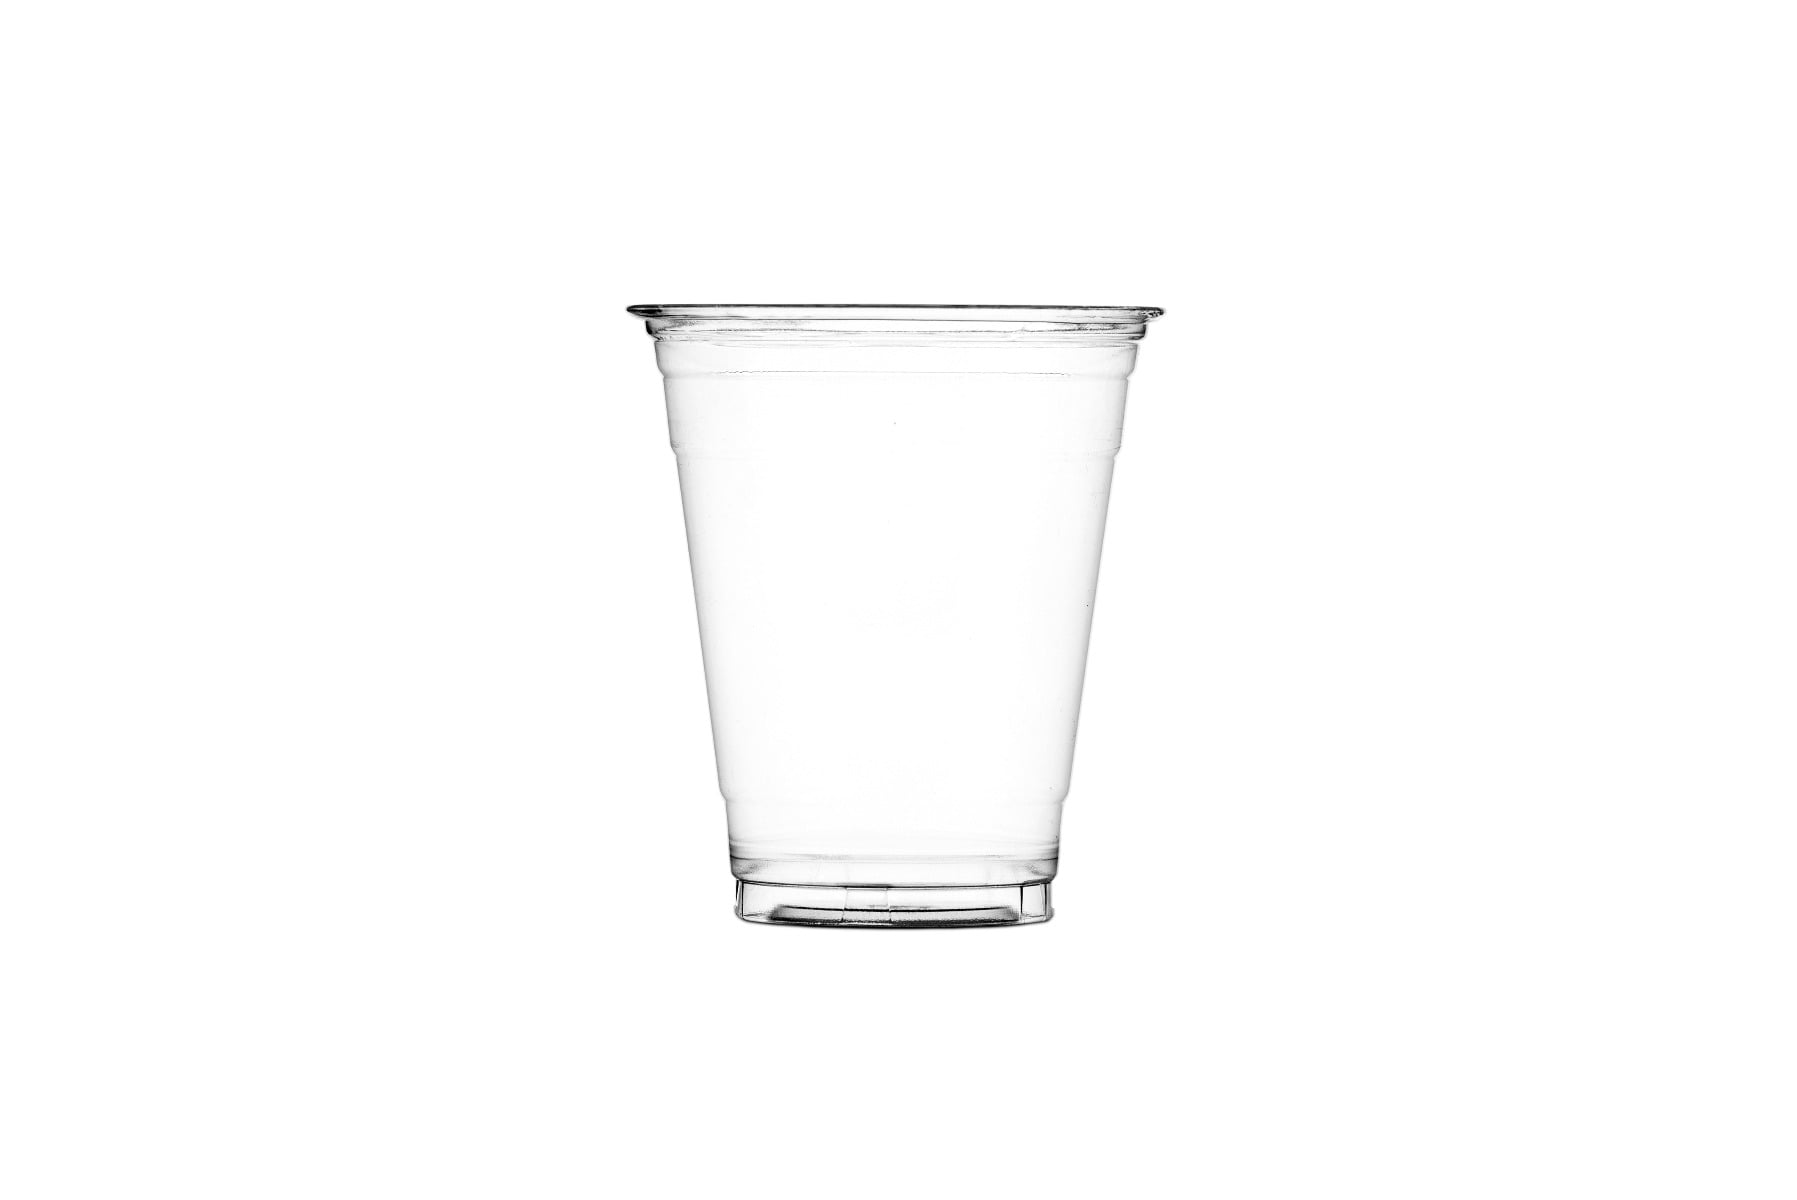 Insert cup 120 ml for use in 95mm smoothie cups